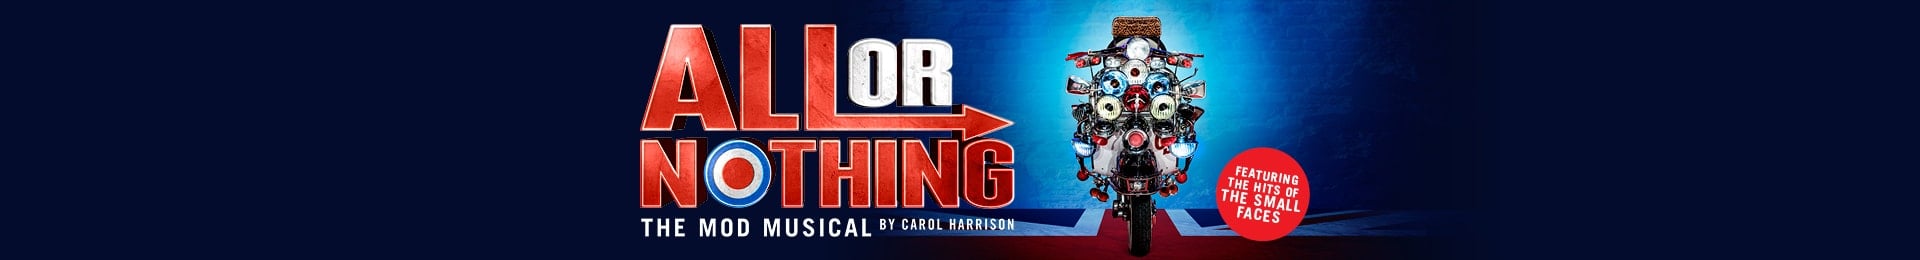 All Or Nothing: The Mod Musical banner image